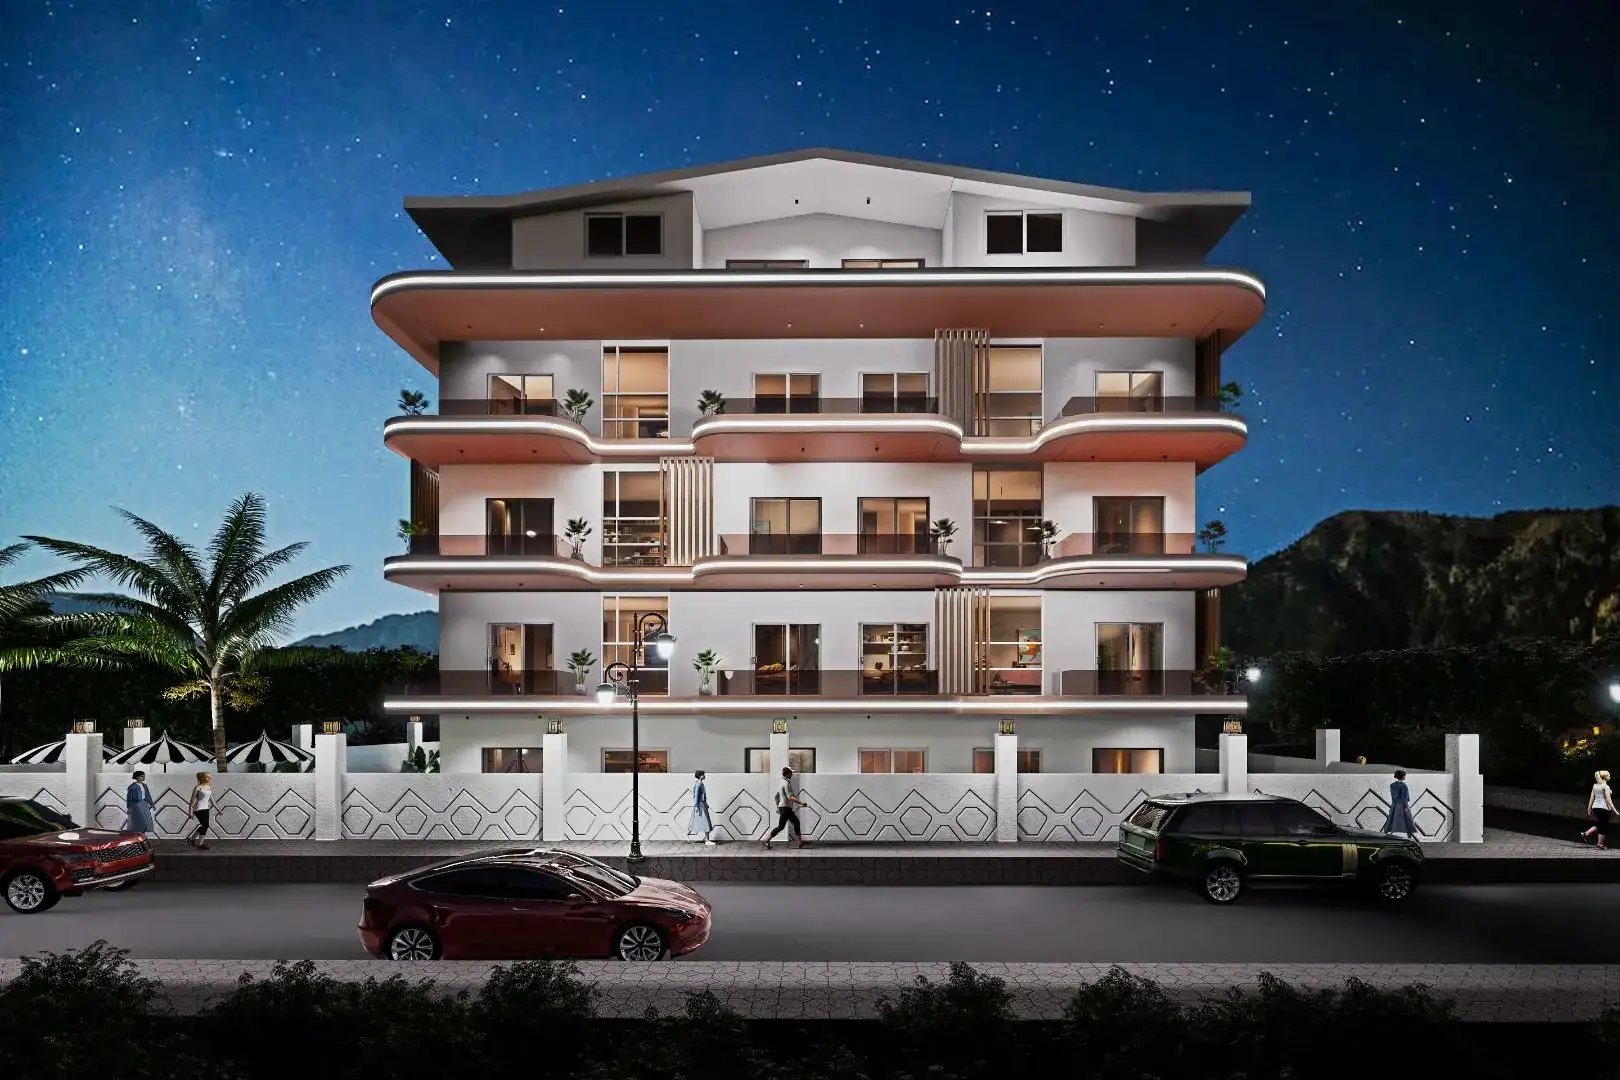 NEW BOUTIQUE PROJECT UNDER CONSTUCTION IN THE CENTER OF GAZİPAŞA